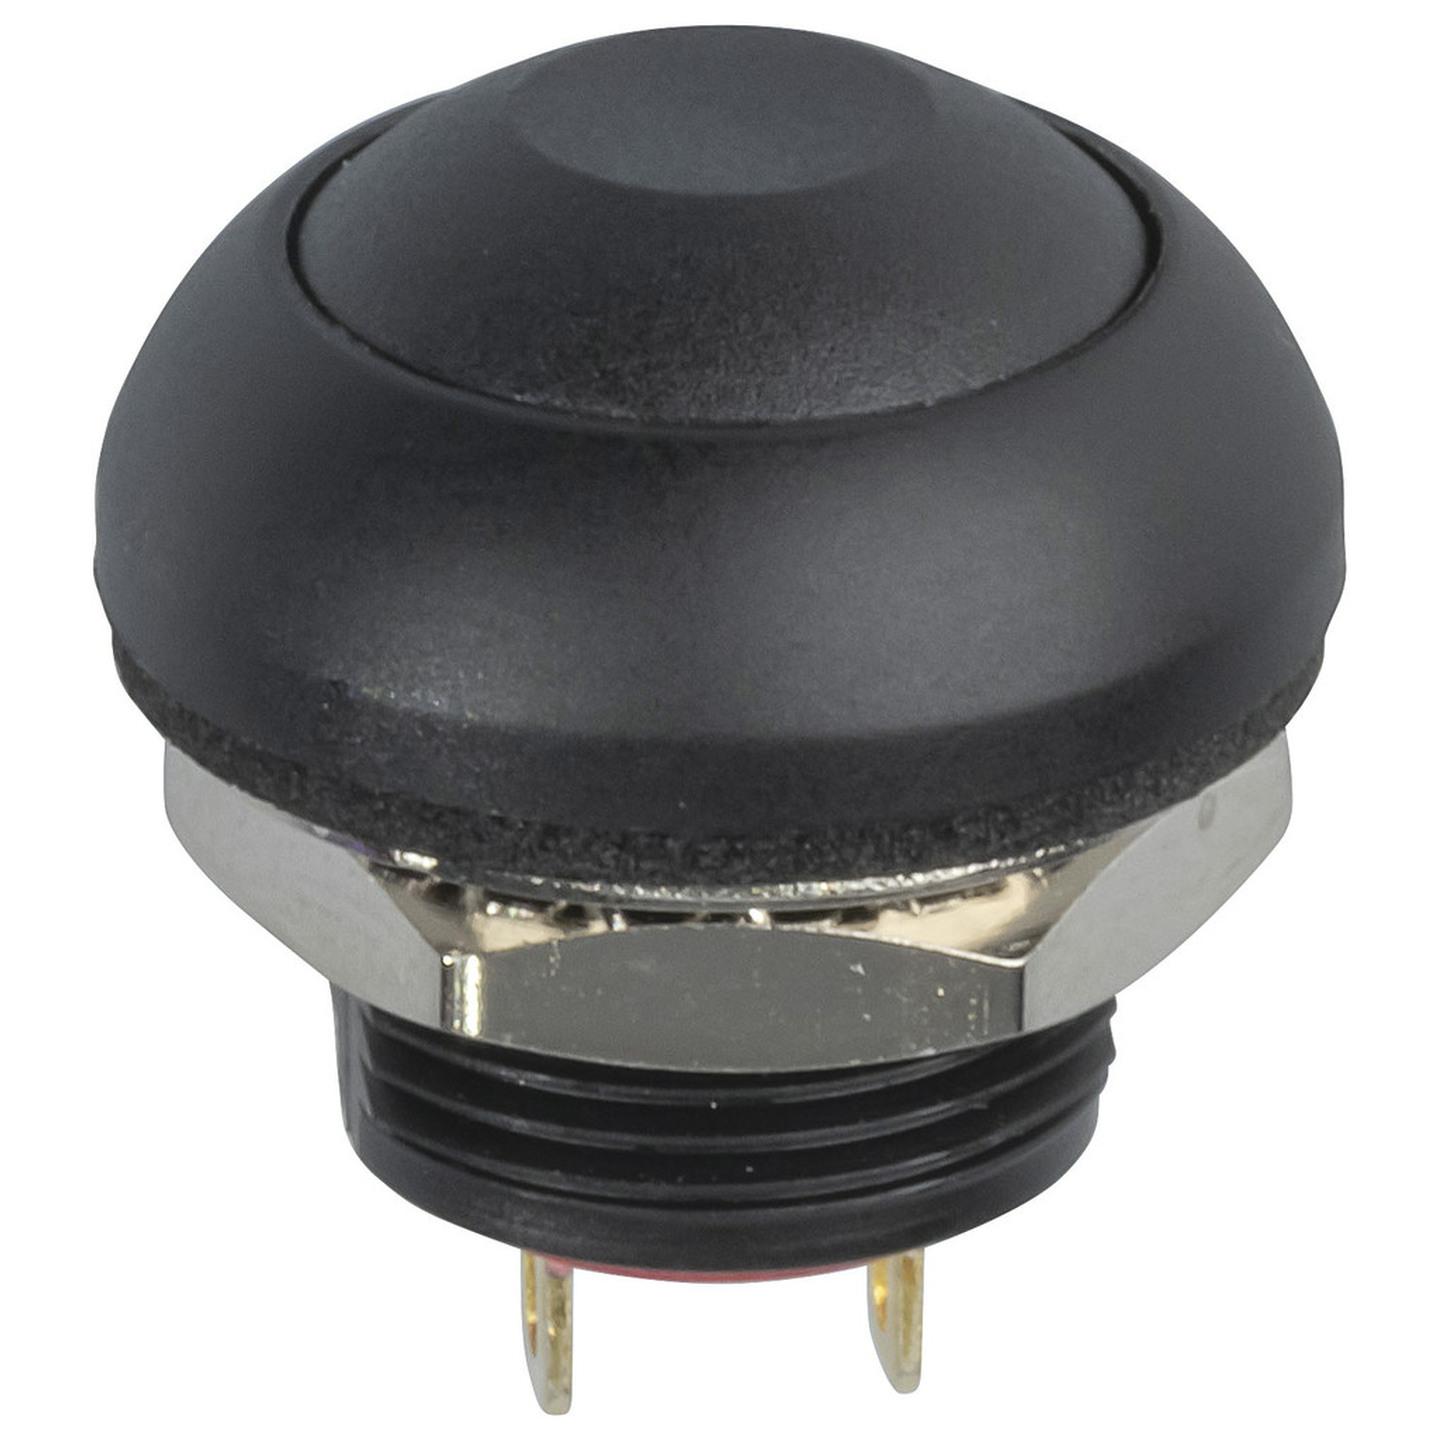 IP67 Rated Dome Pushbutton Switch Black